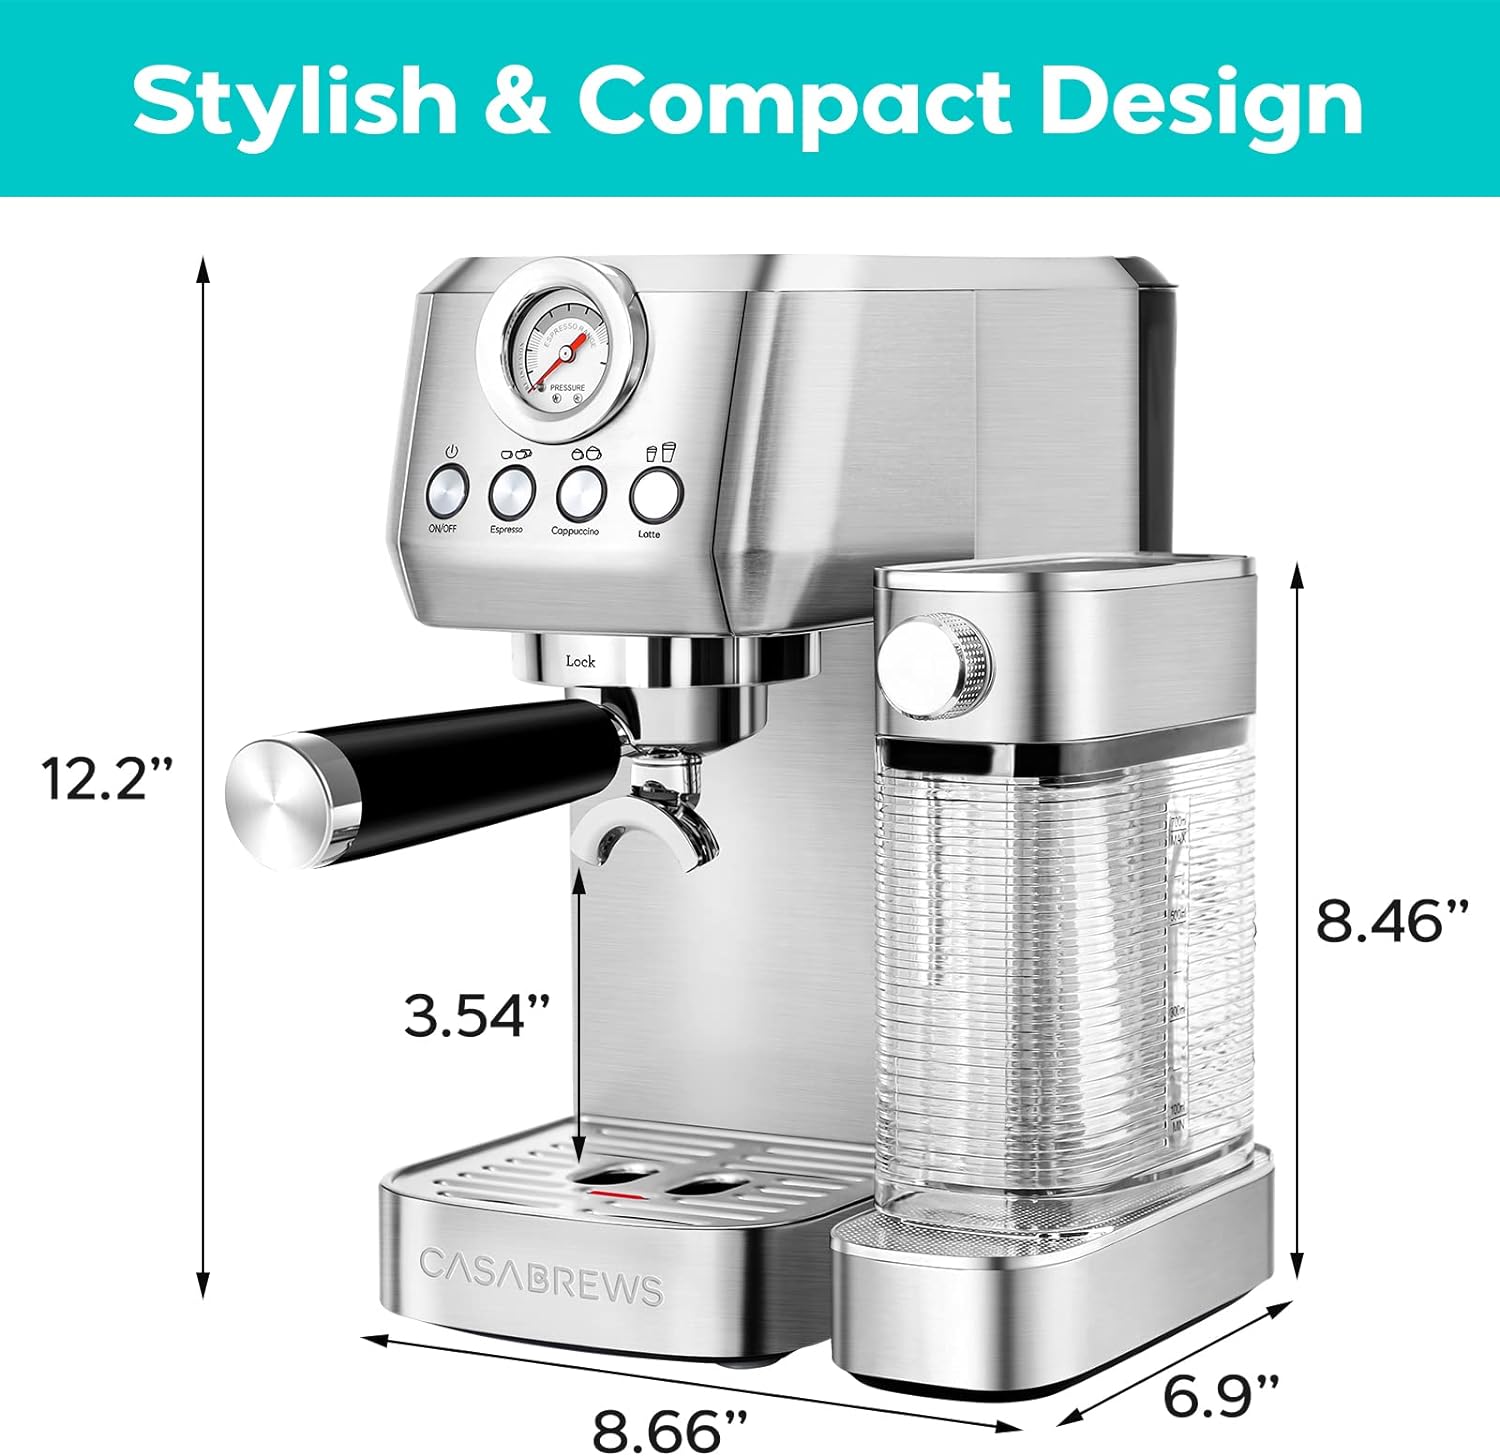 CASABREWS Espresso Machine 20 Bar, Compact Cappuccino Machine with Automatic Milk Frother, Stainless Steel Espresso Maker With 49 oz Removable Water Tank for Latte, Gift for Coffee Lover